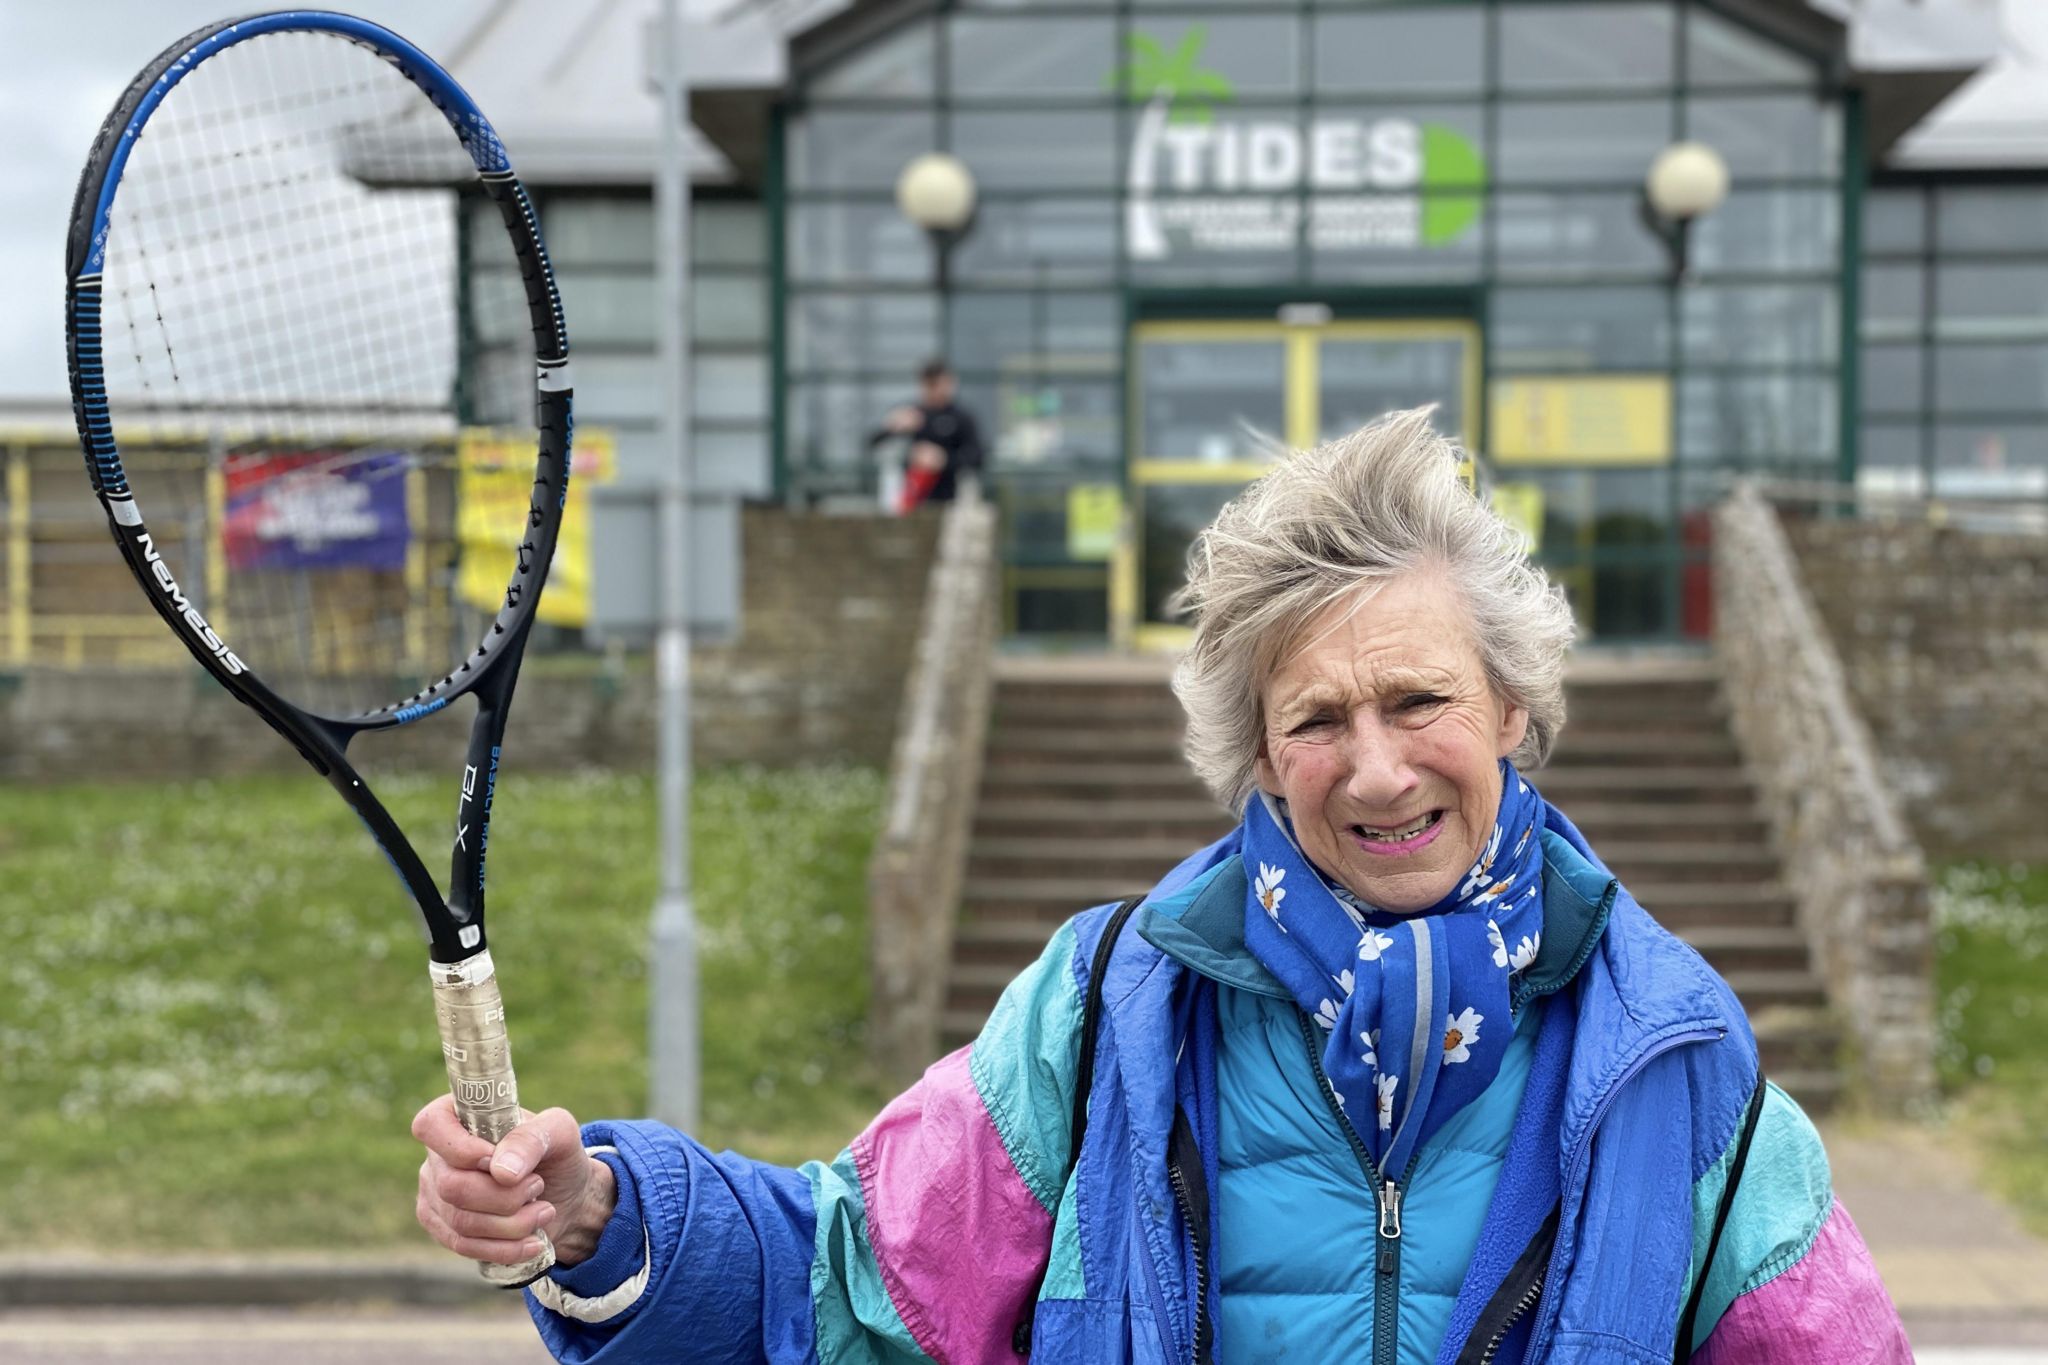 Deal pensioner unable to play tennis as venues do not accept cash